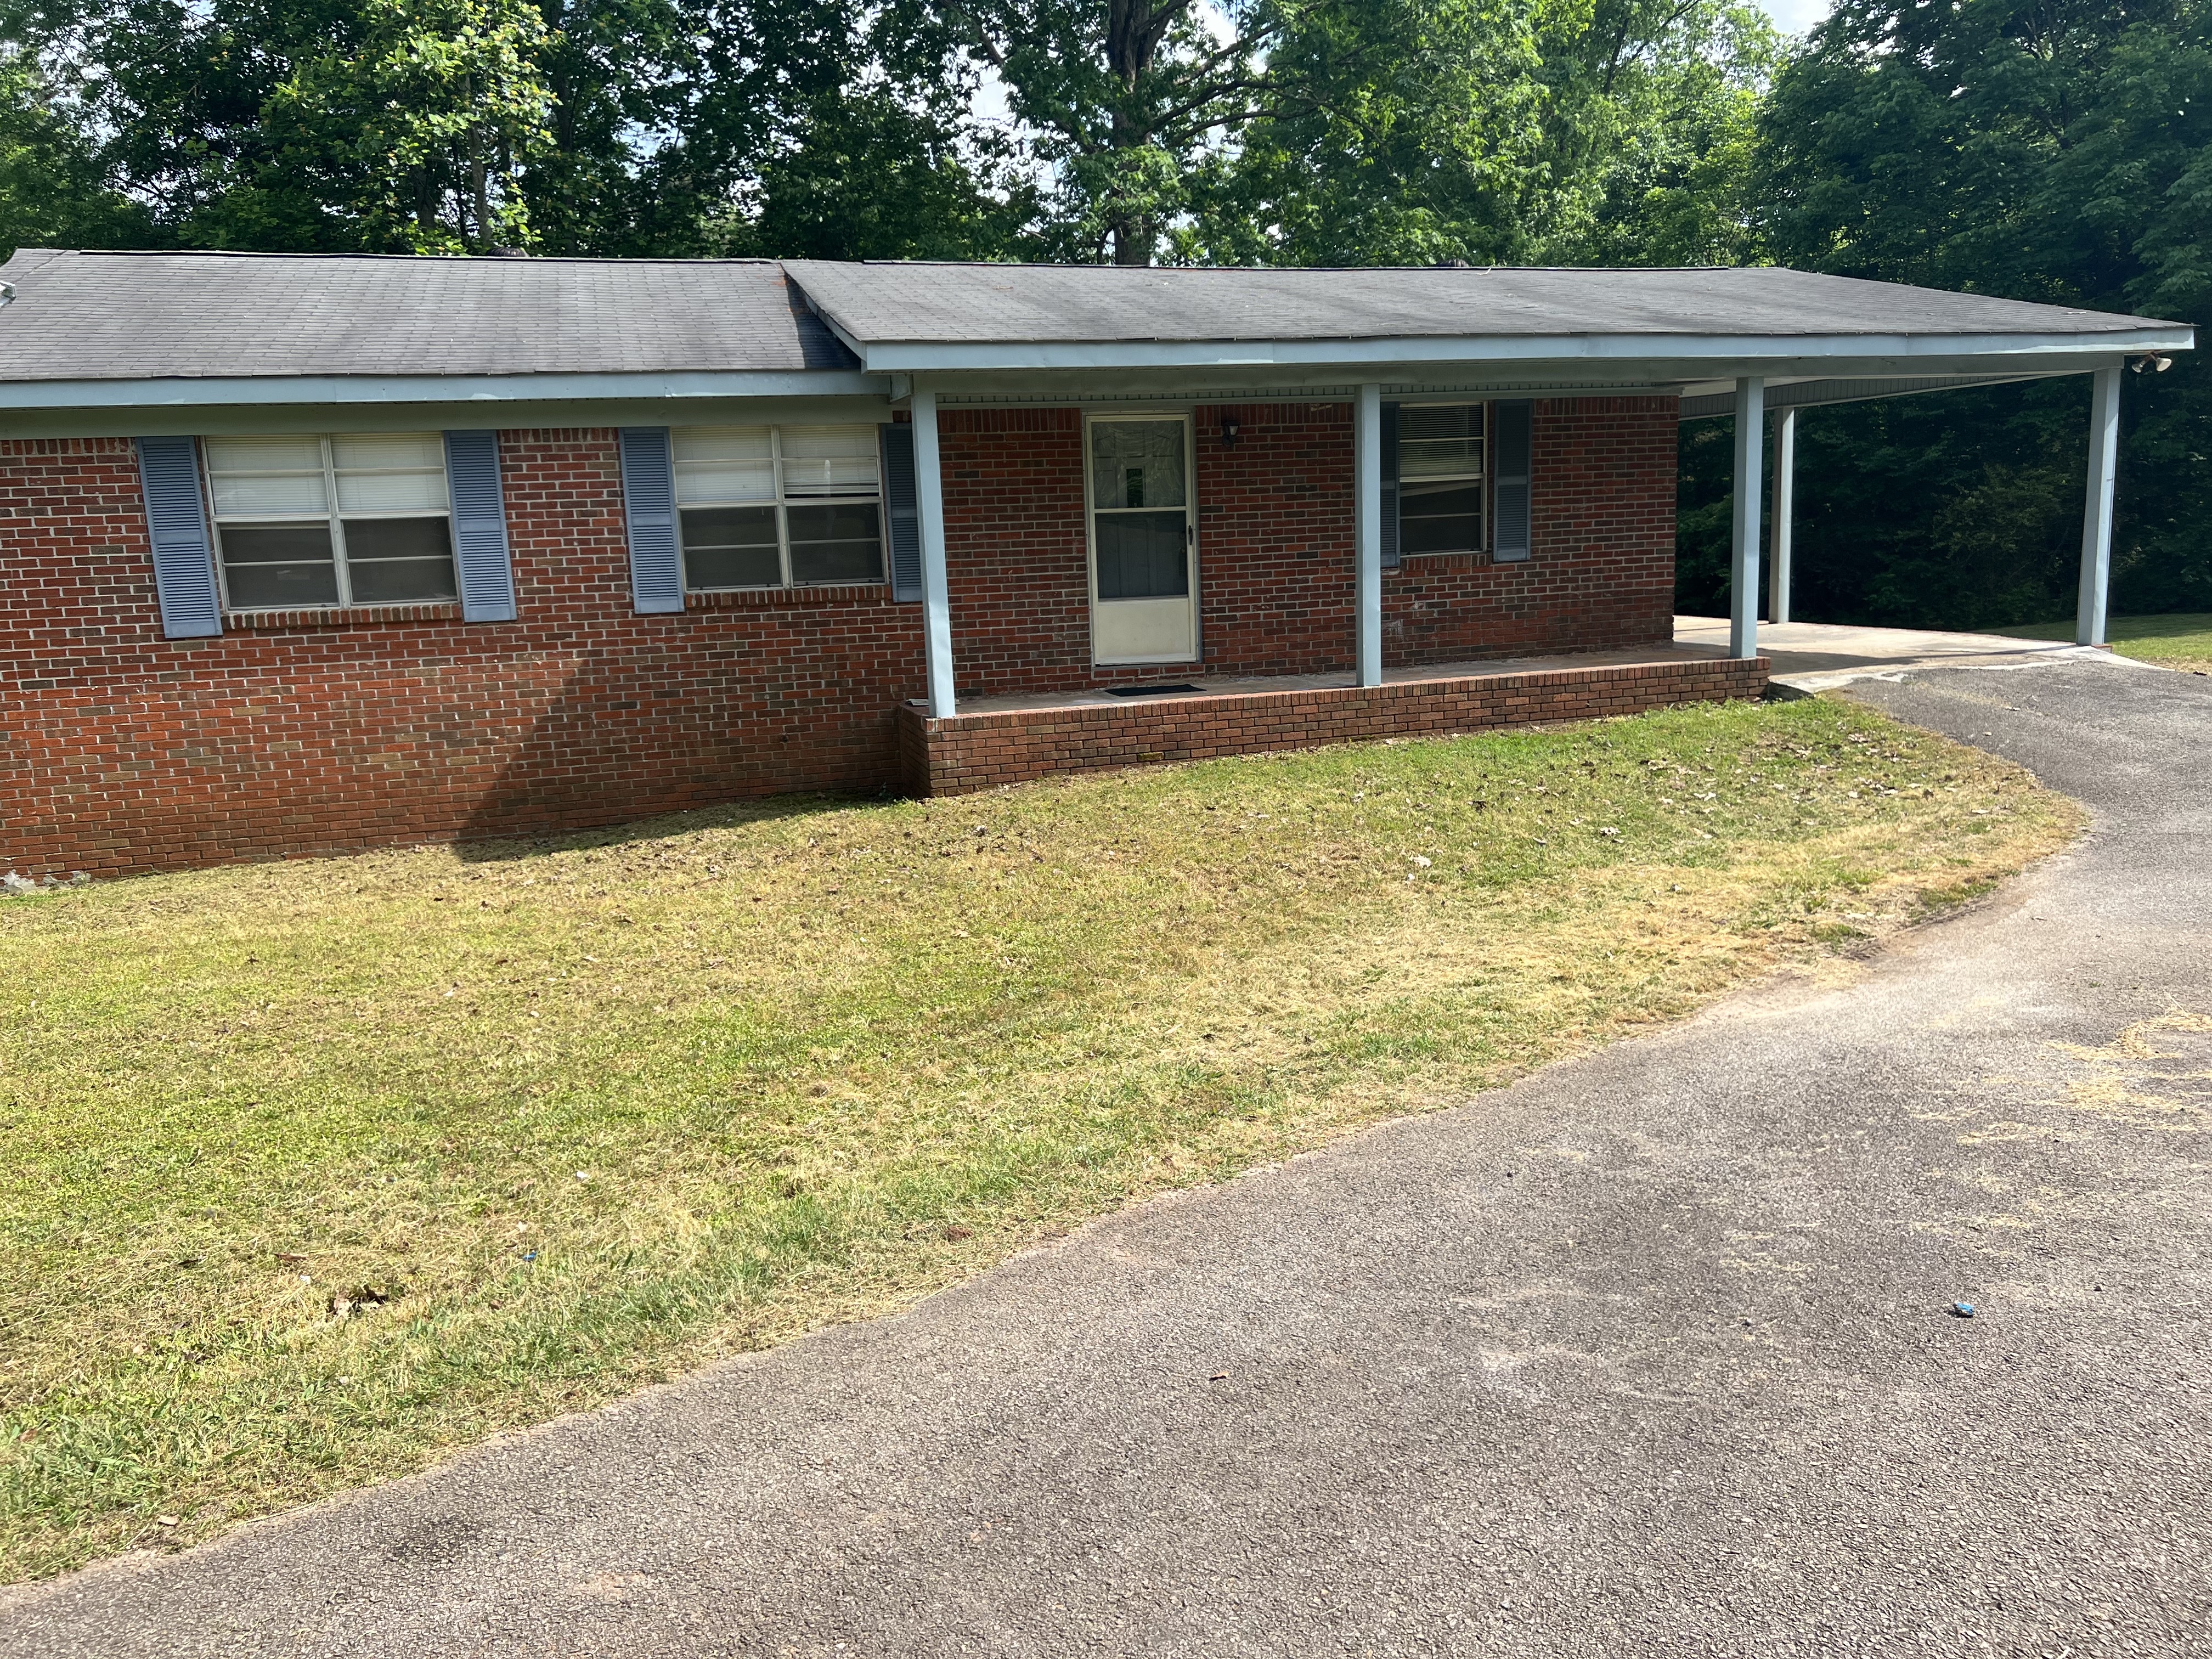 2651 Lee Land Rd, Gainesville, GA 30507 - OFF-MARKET Property with Acreage - $280K or TRADE!